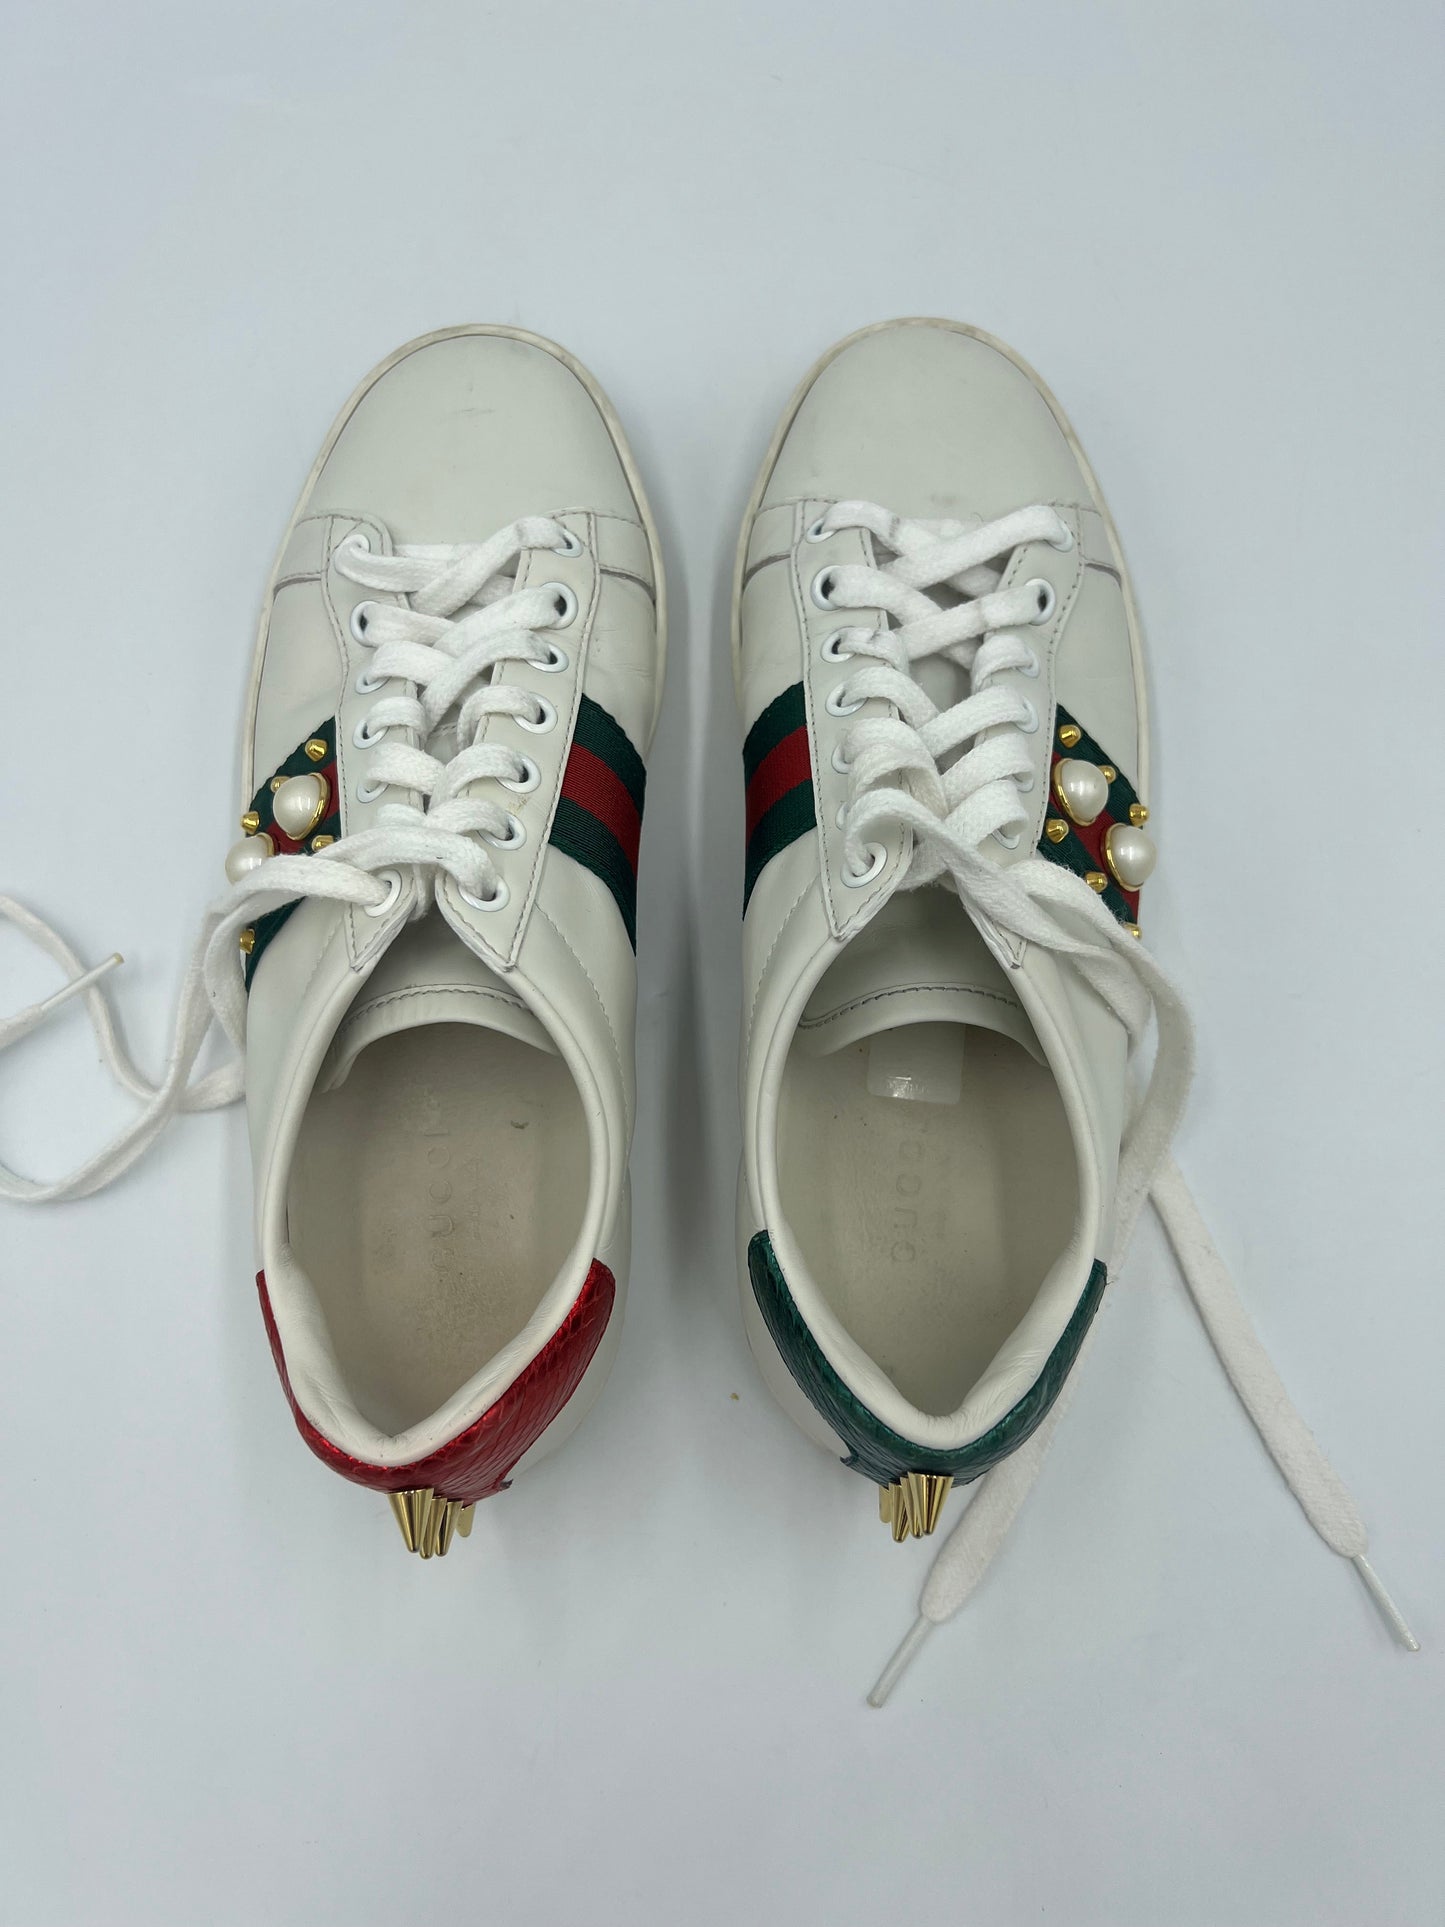 Gucci Ace White Leather & Studded Sneakers   Size: 6